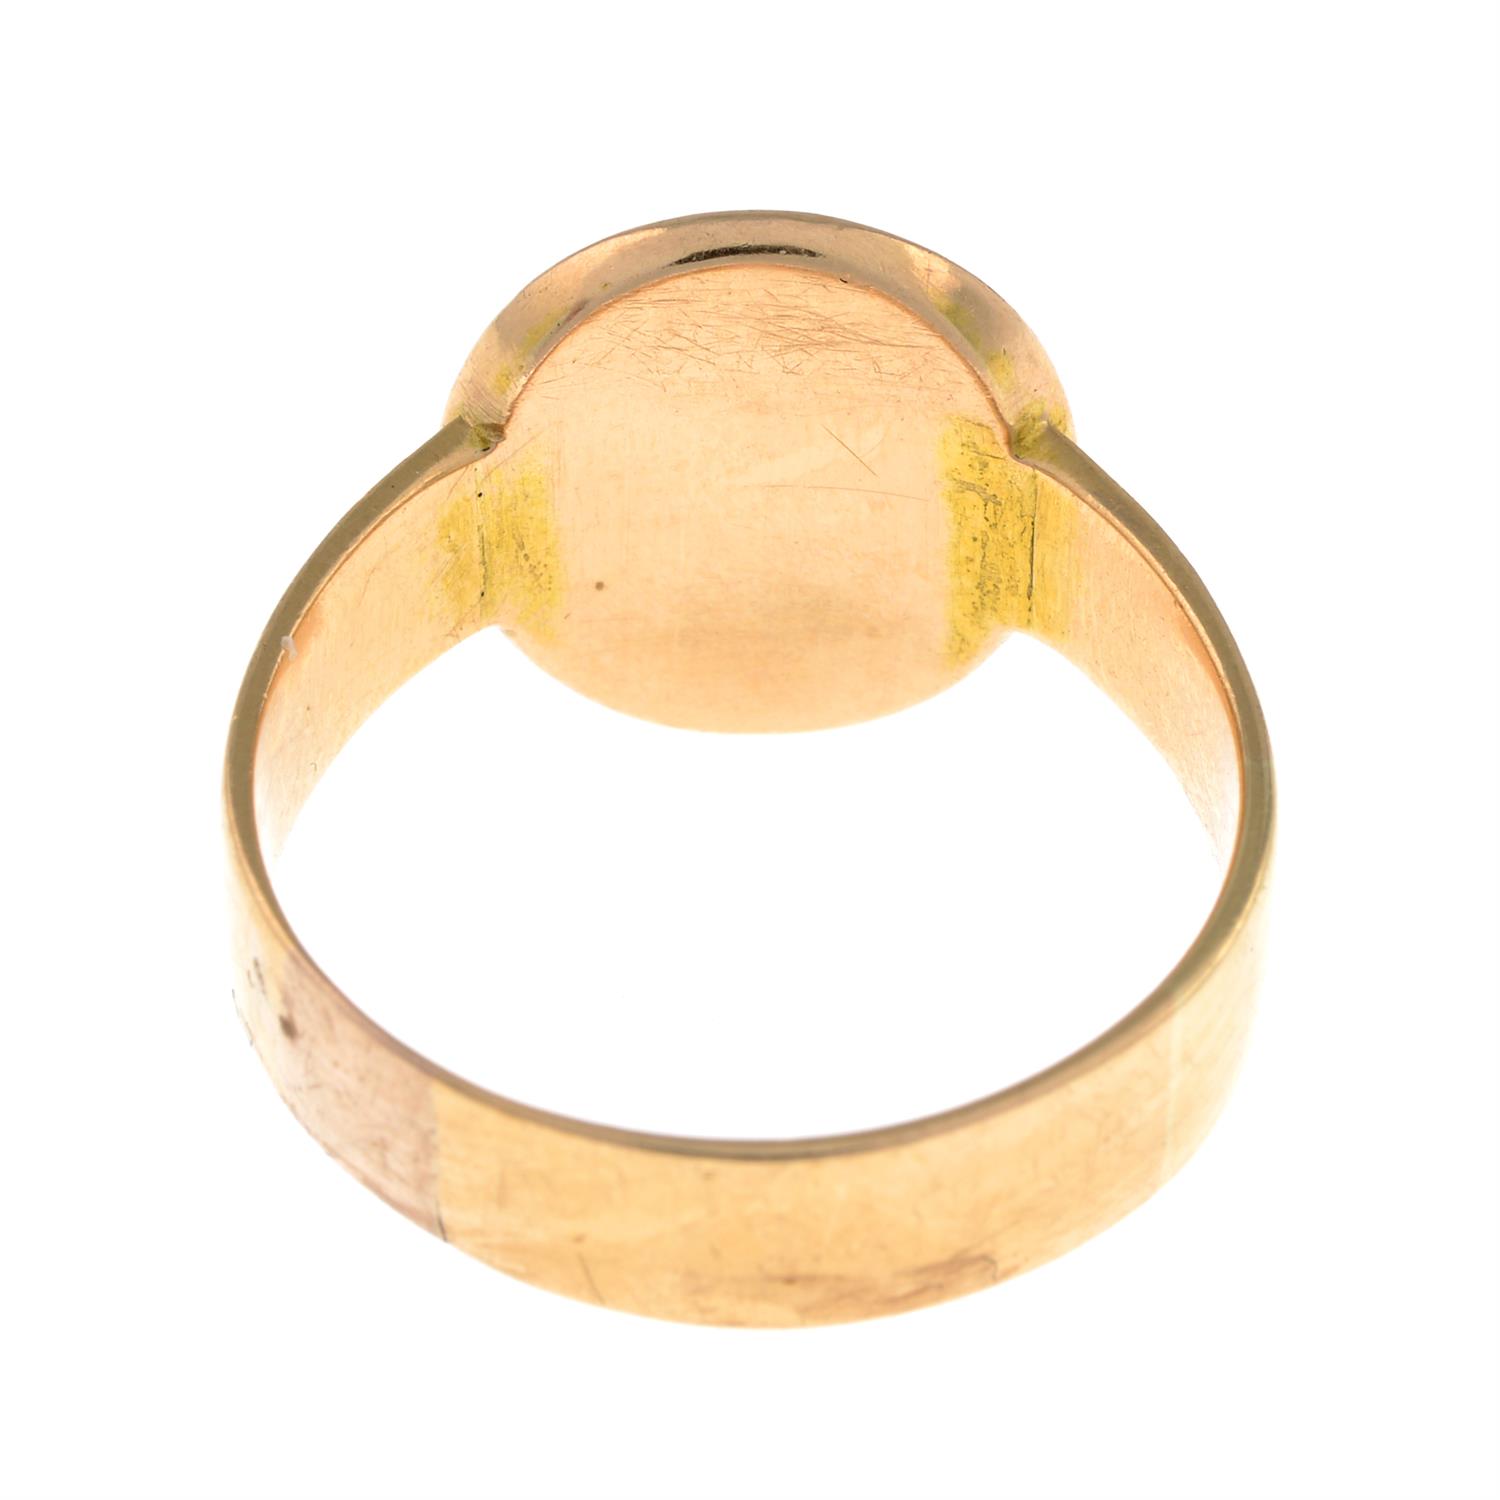 Victorian gold bloodstone signet ring - Image 3 of 6